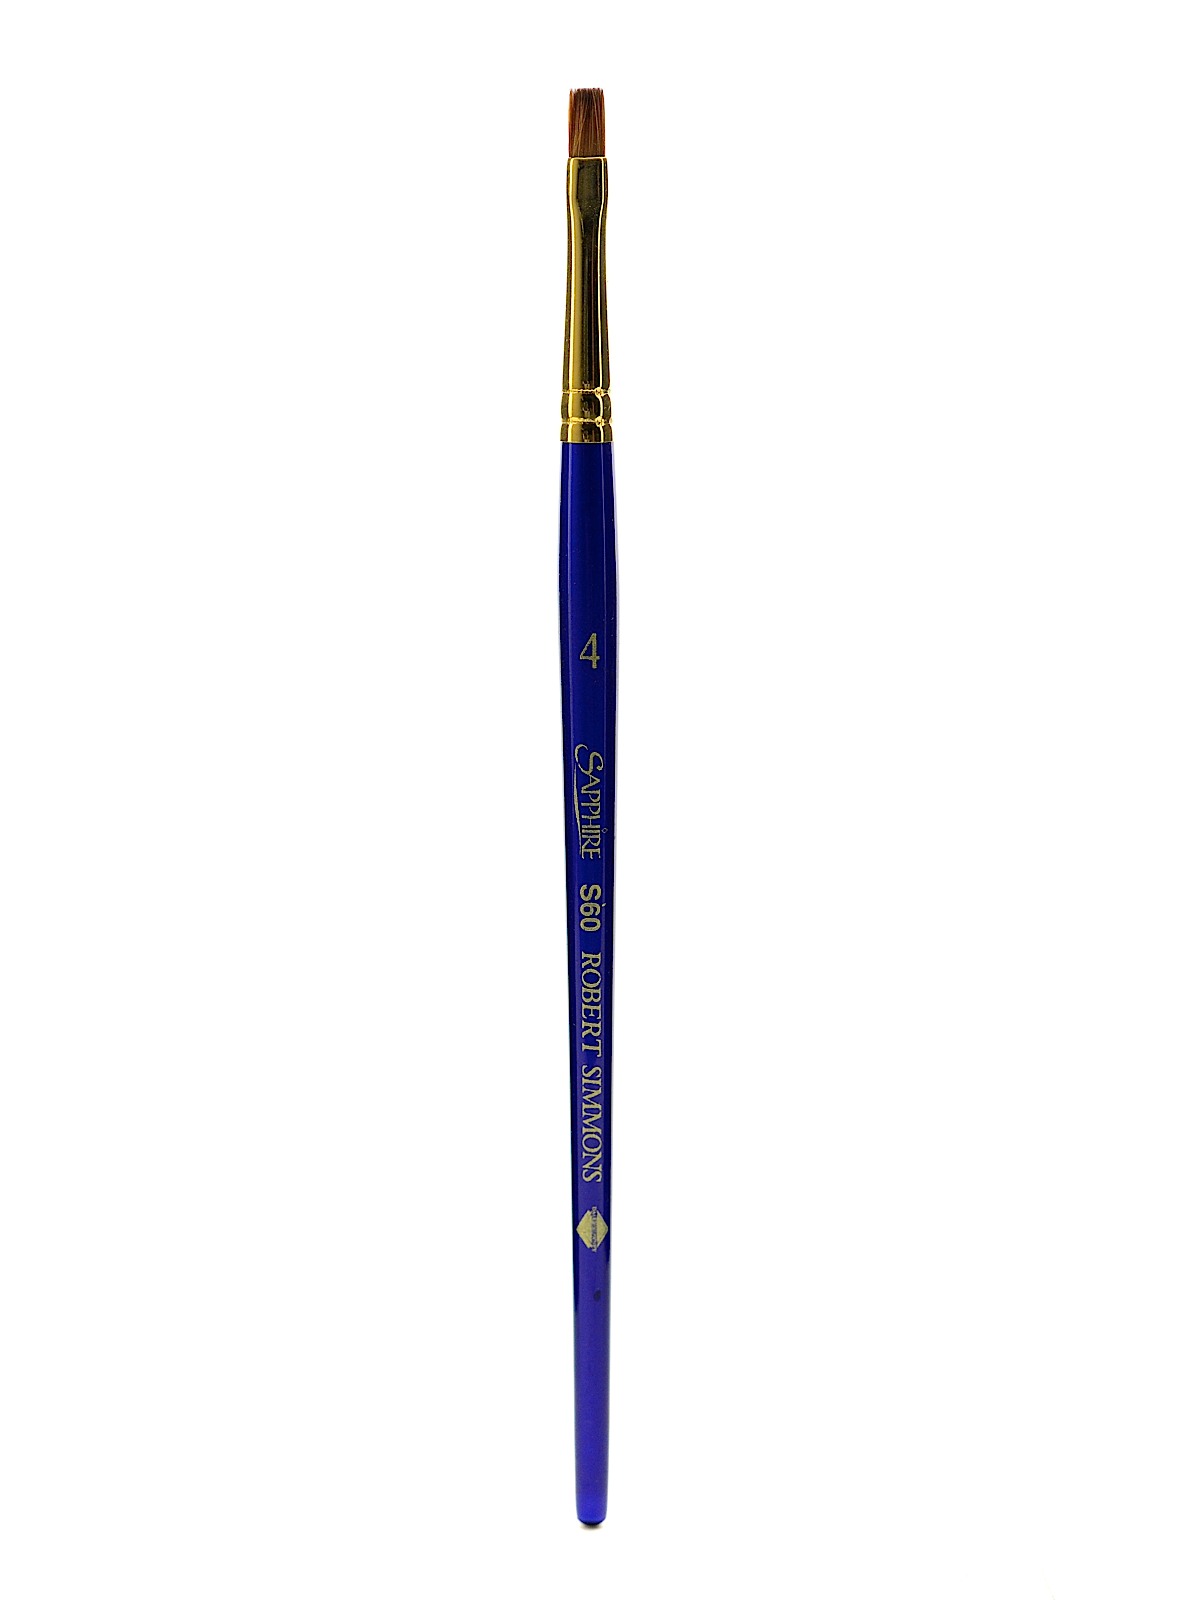 Sapphire Series Synthetic Brushes Short Handle 4 Shader S60